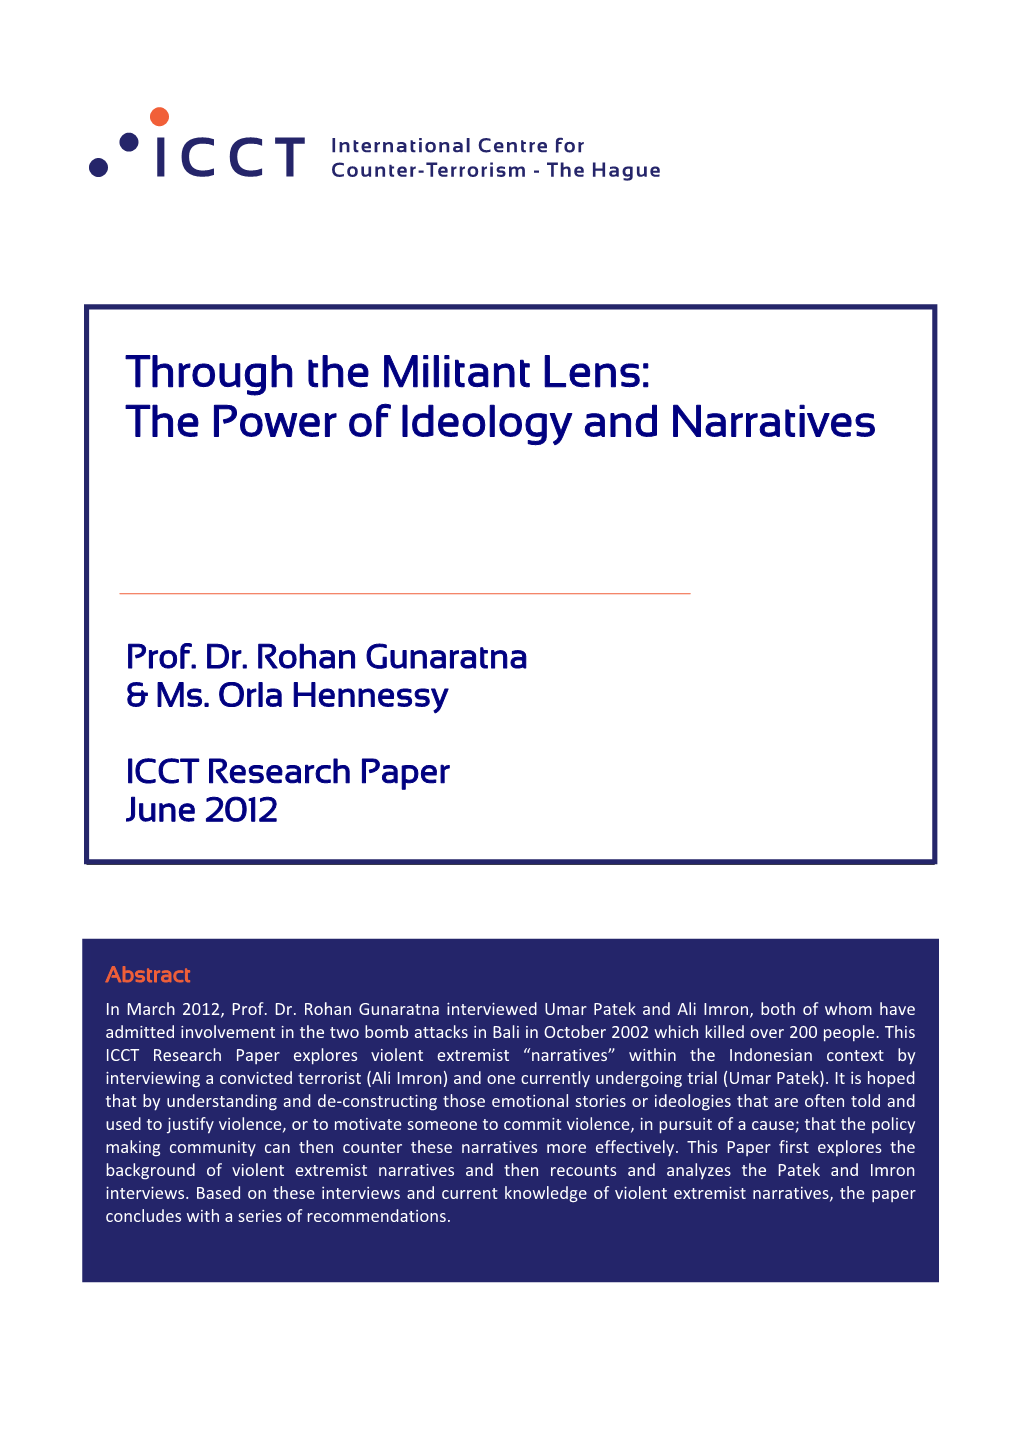 Through the Militant Lens: the Power of Ideology and Narratives